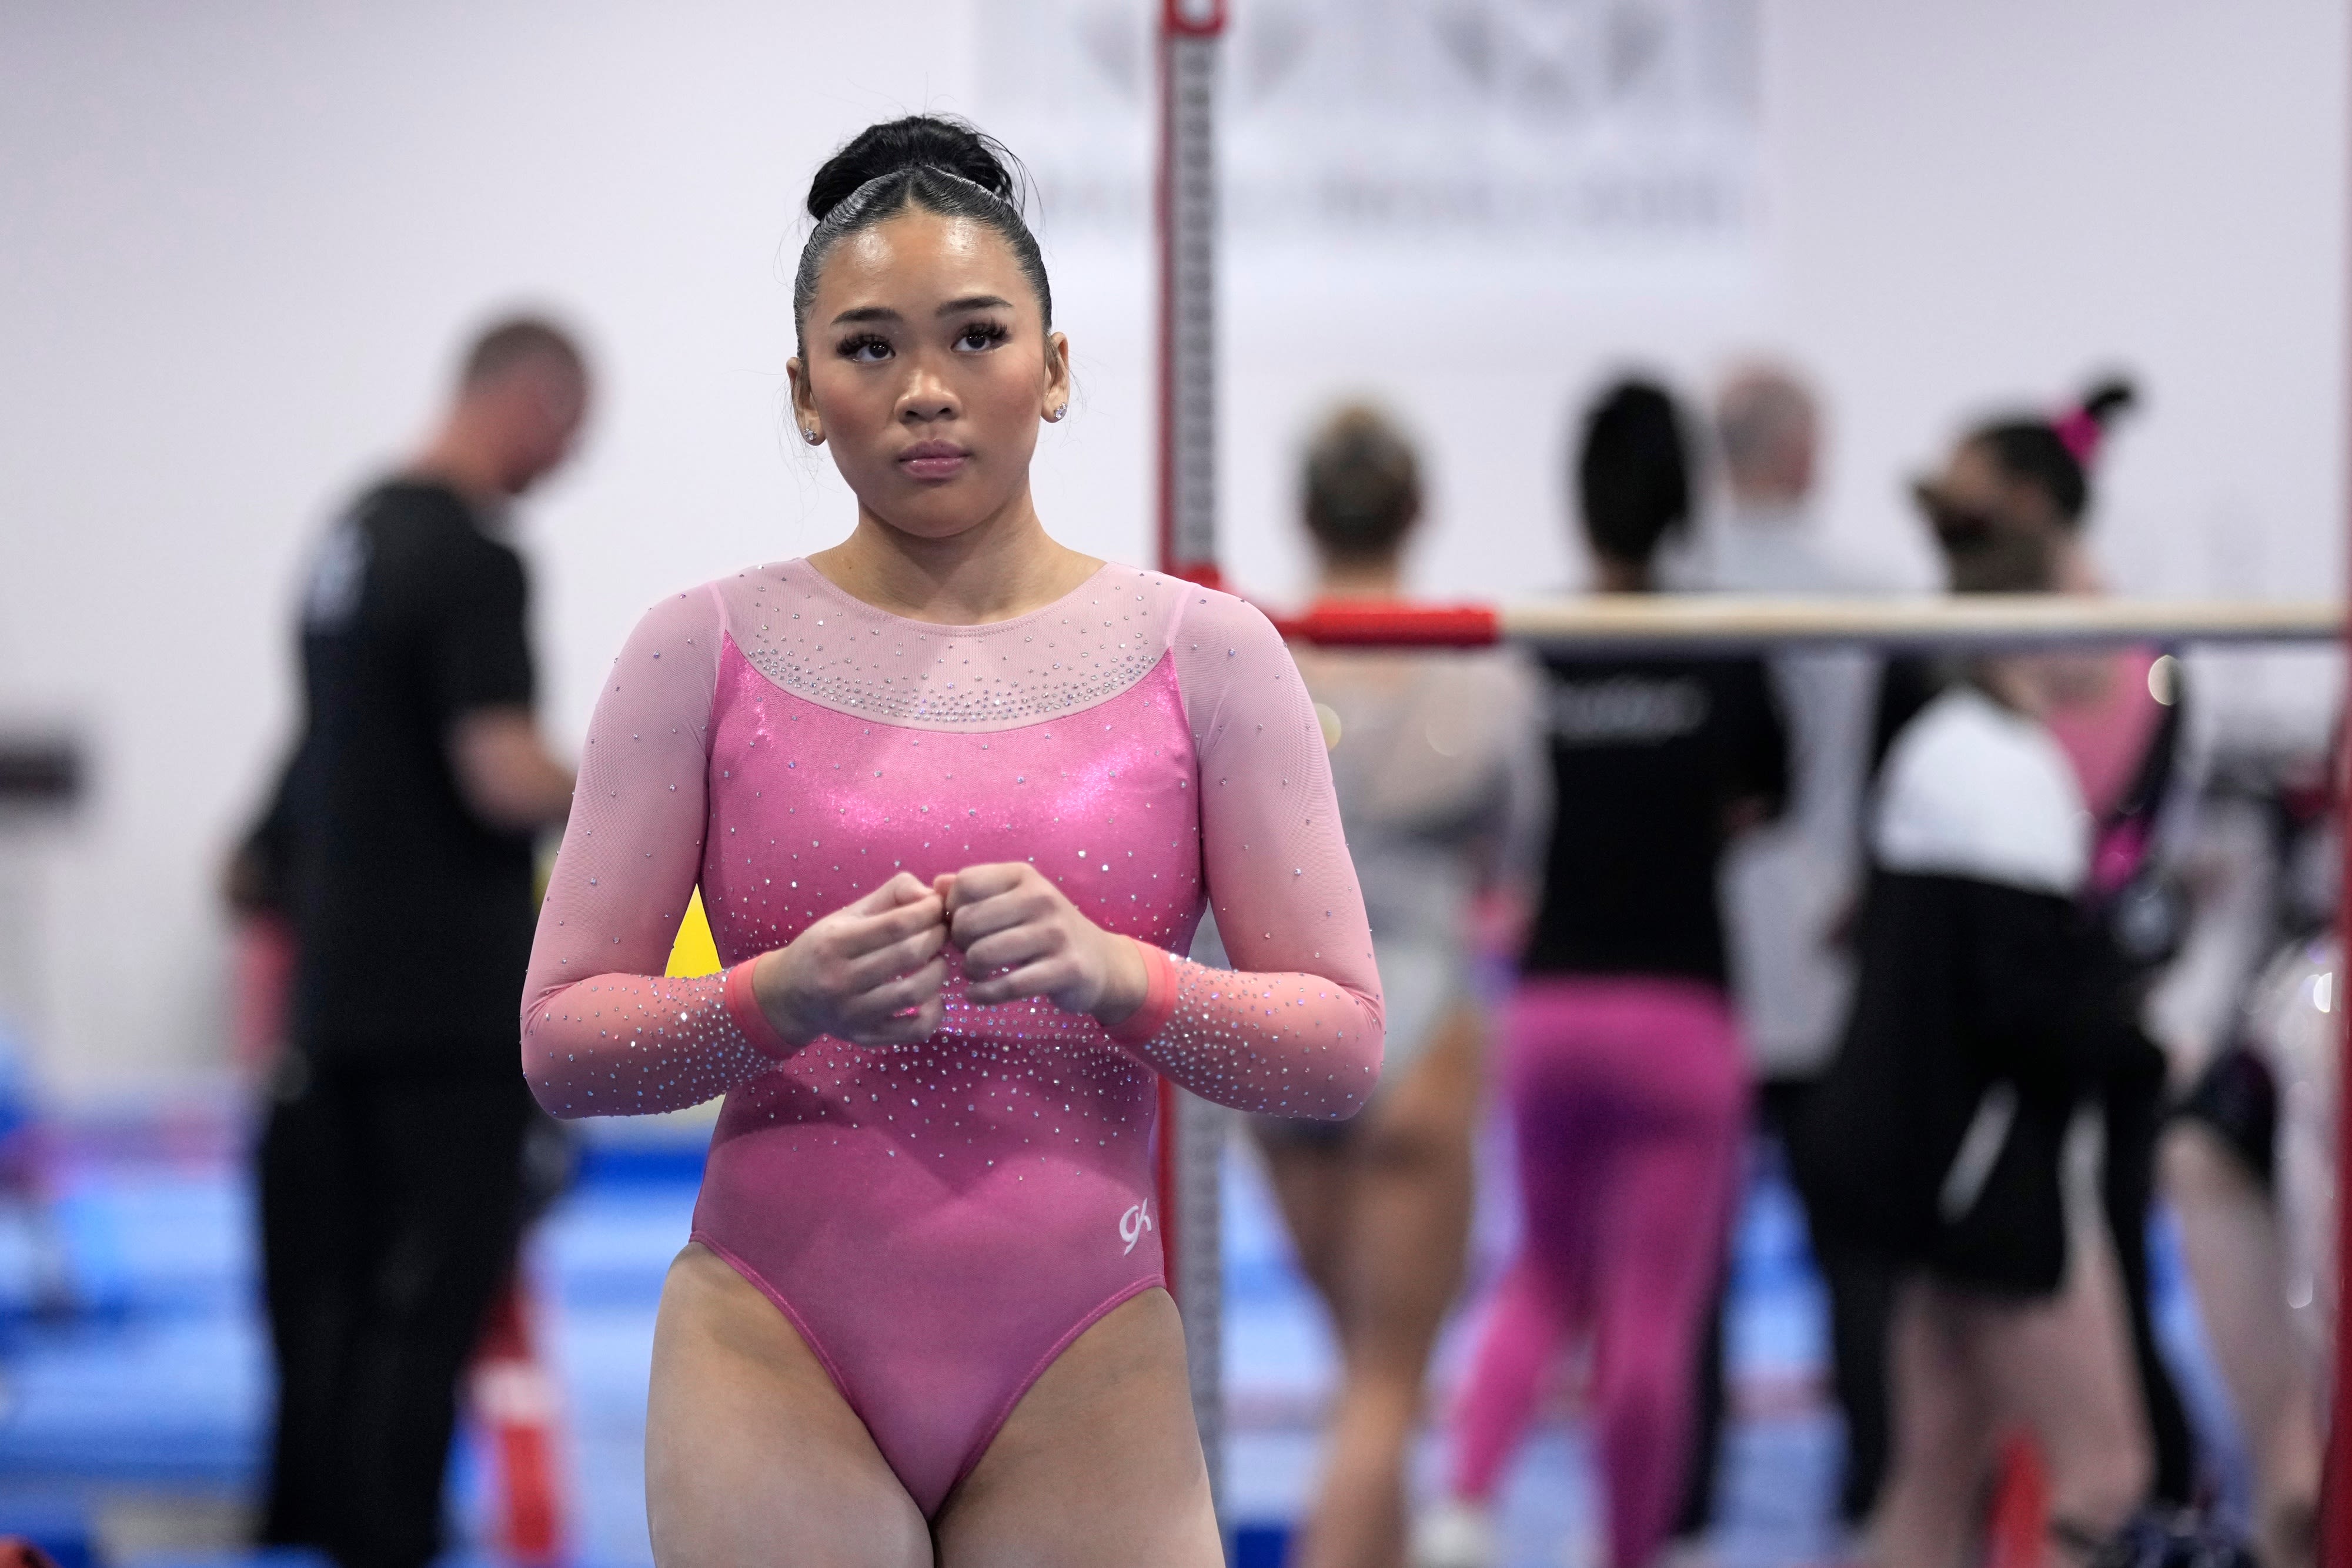 Gymnast Sunisa Lee won gold in Tokyo. Now she’s back to silence her doubts.